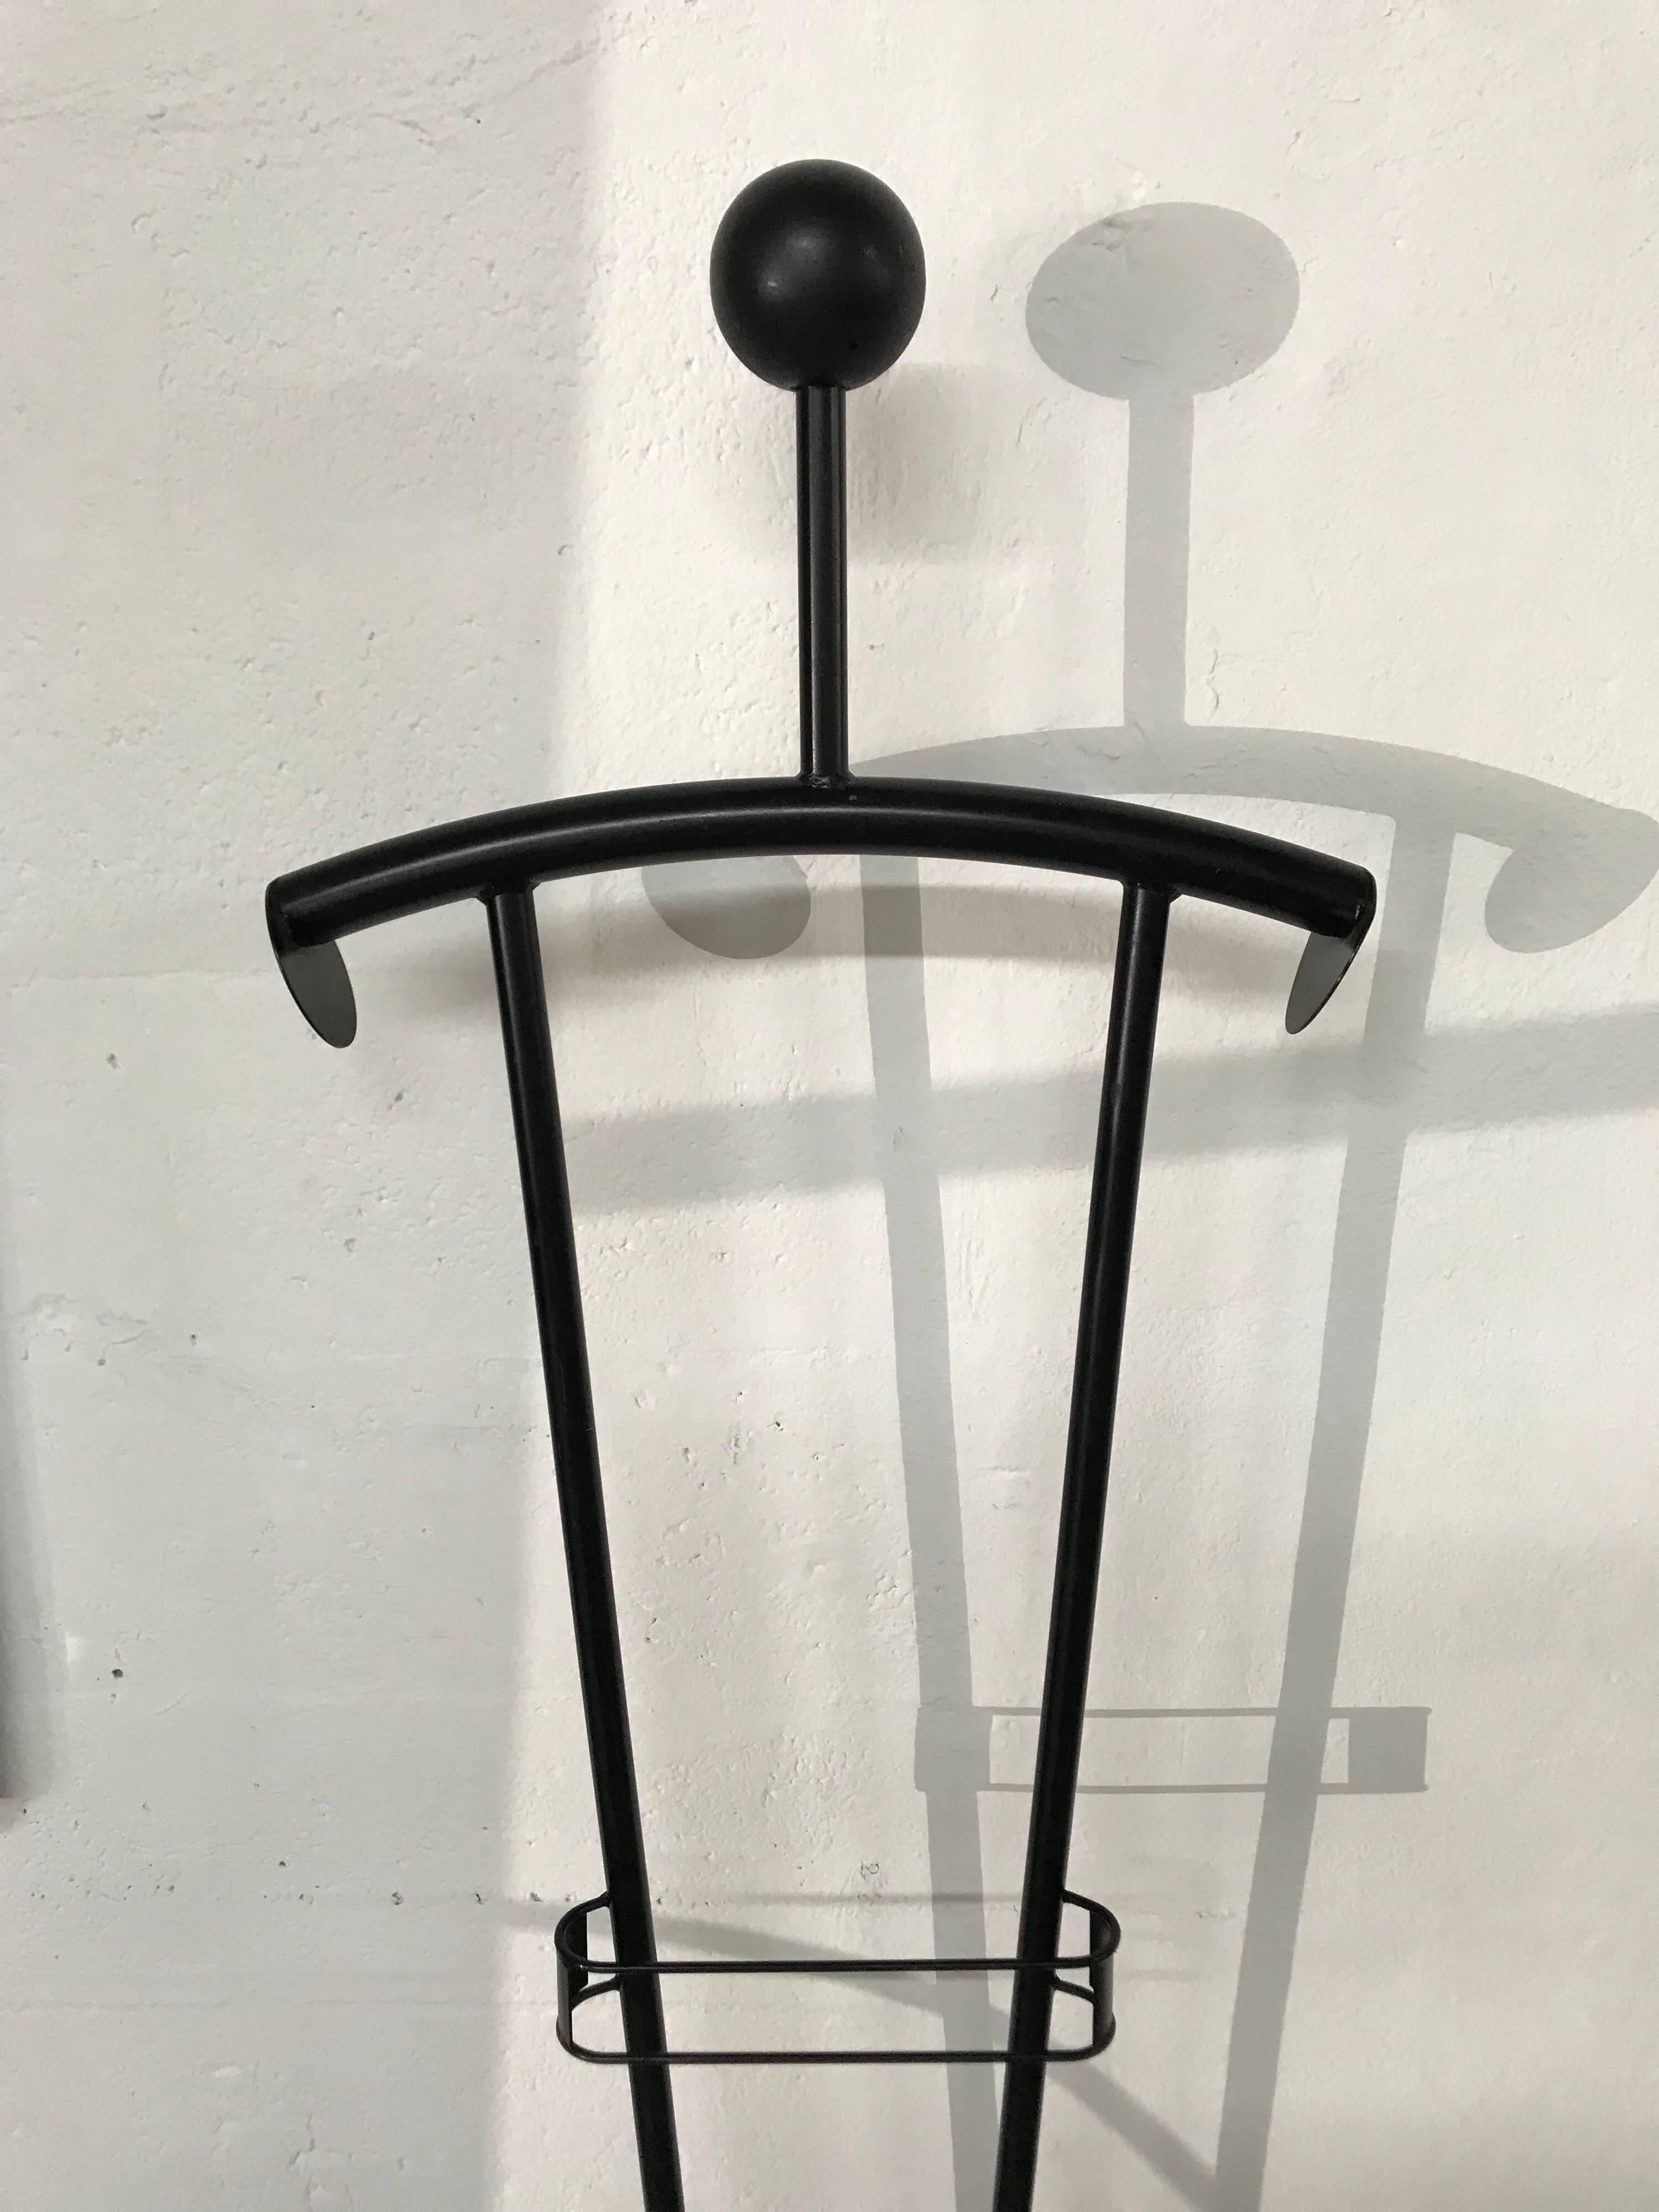 Memphis style valet stands or coat rack rendered in black powder coated metal, pair available, priced individually.